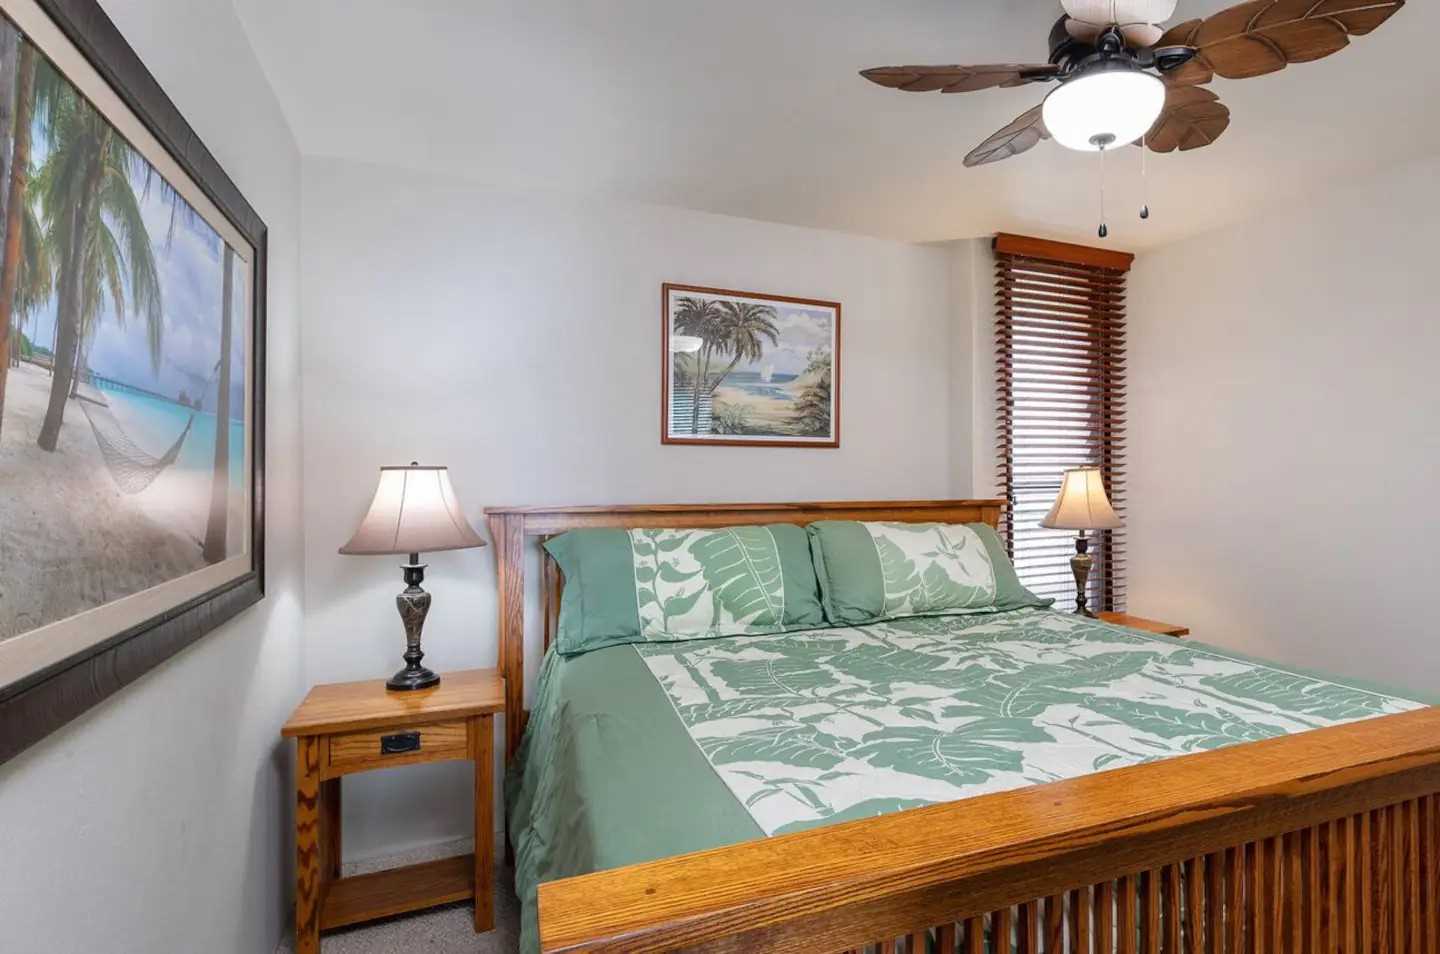 Comfortable newer California King Bed. Ceiling fan and louve